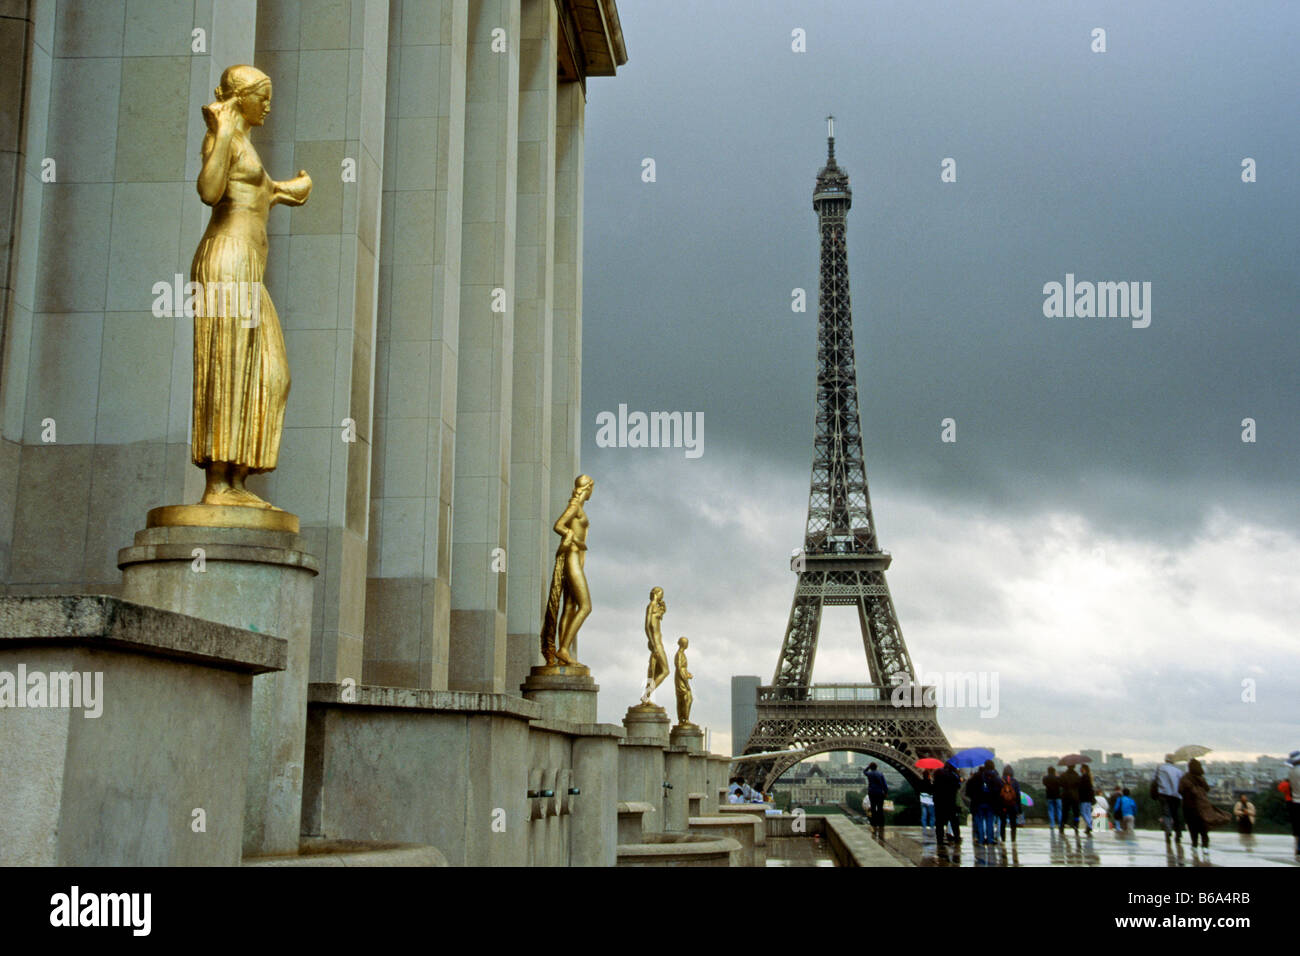 Eiffel Tower, Paris, with gold statues of Palais De Chaillot in foreground Stock Photo